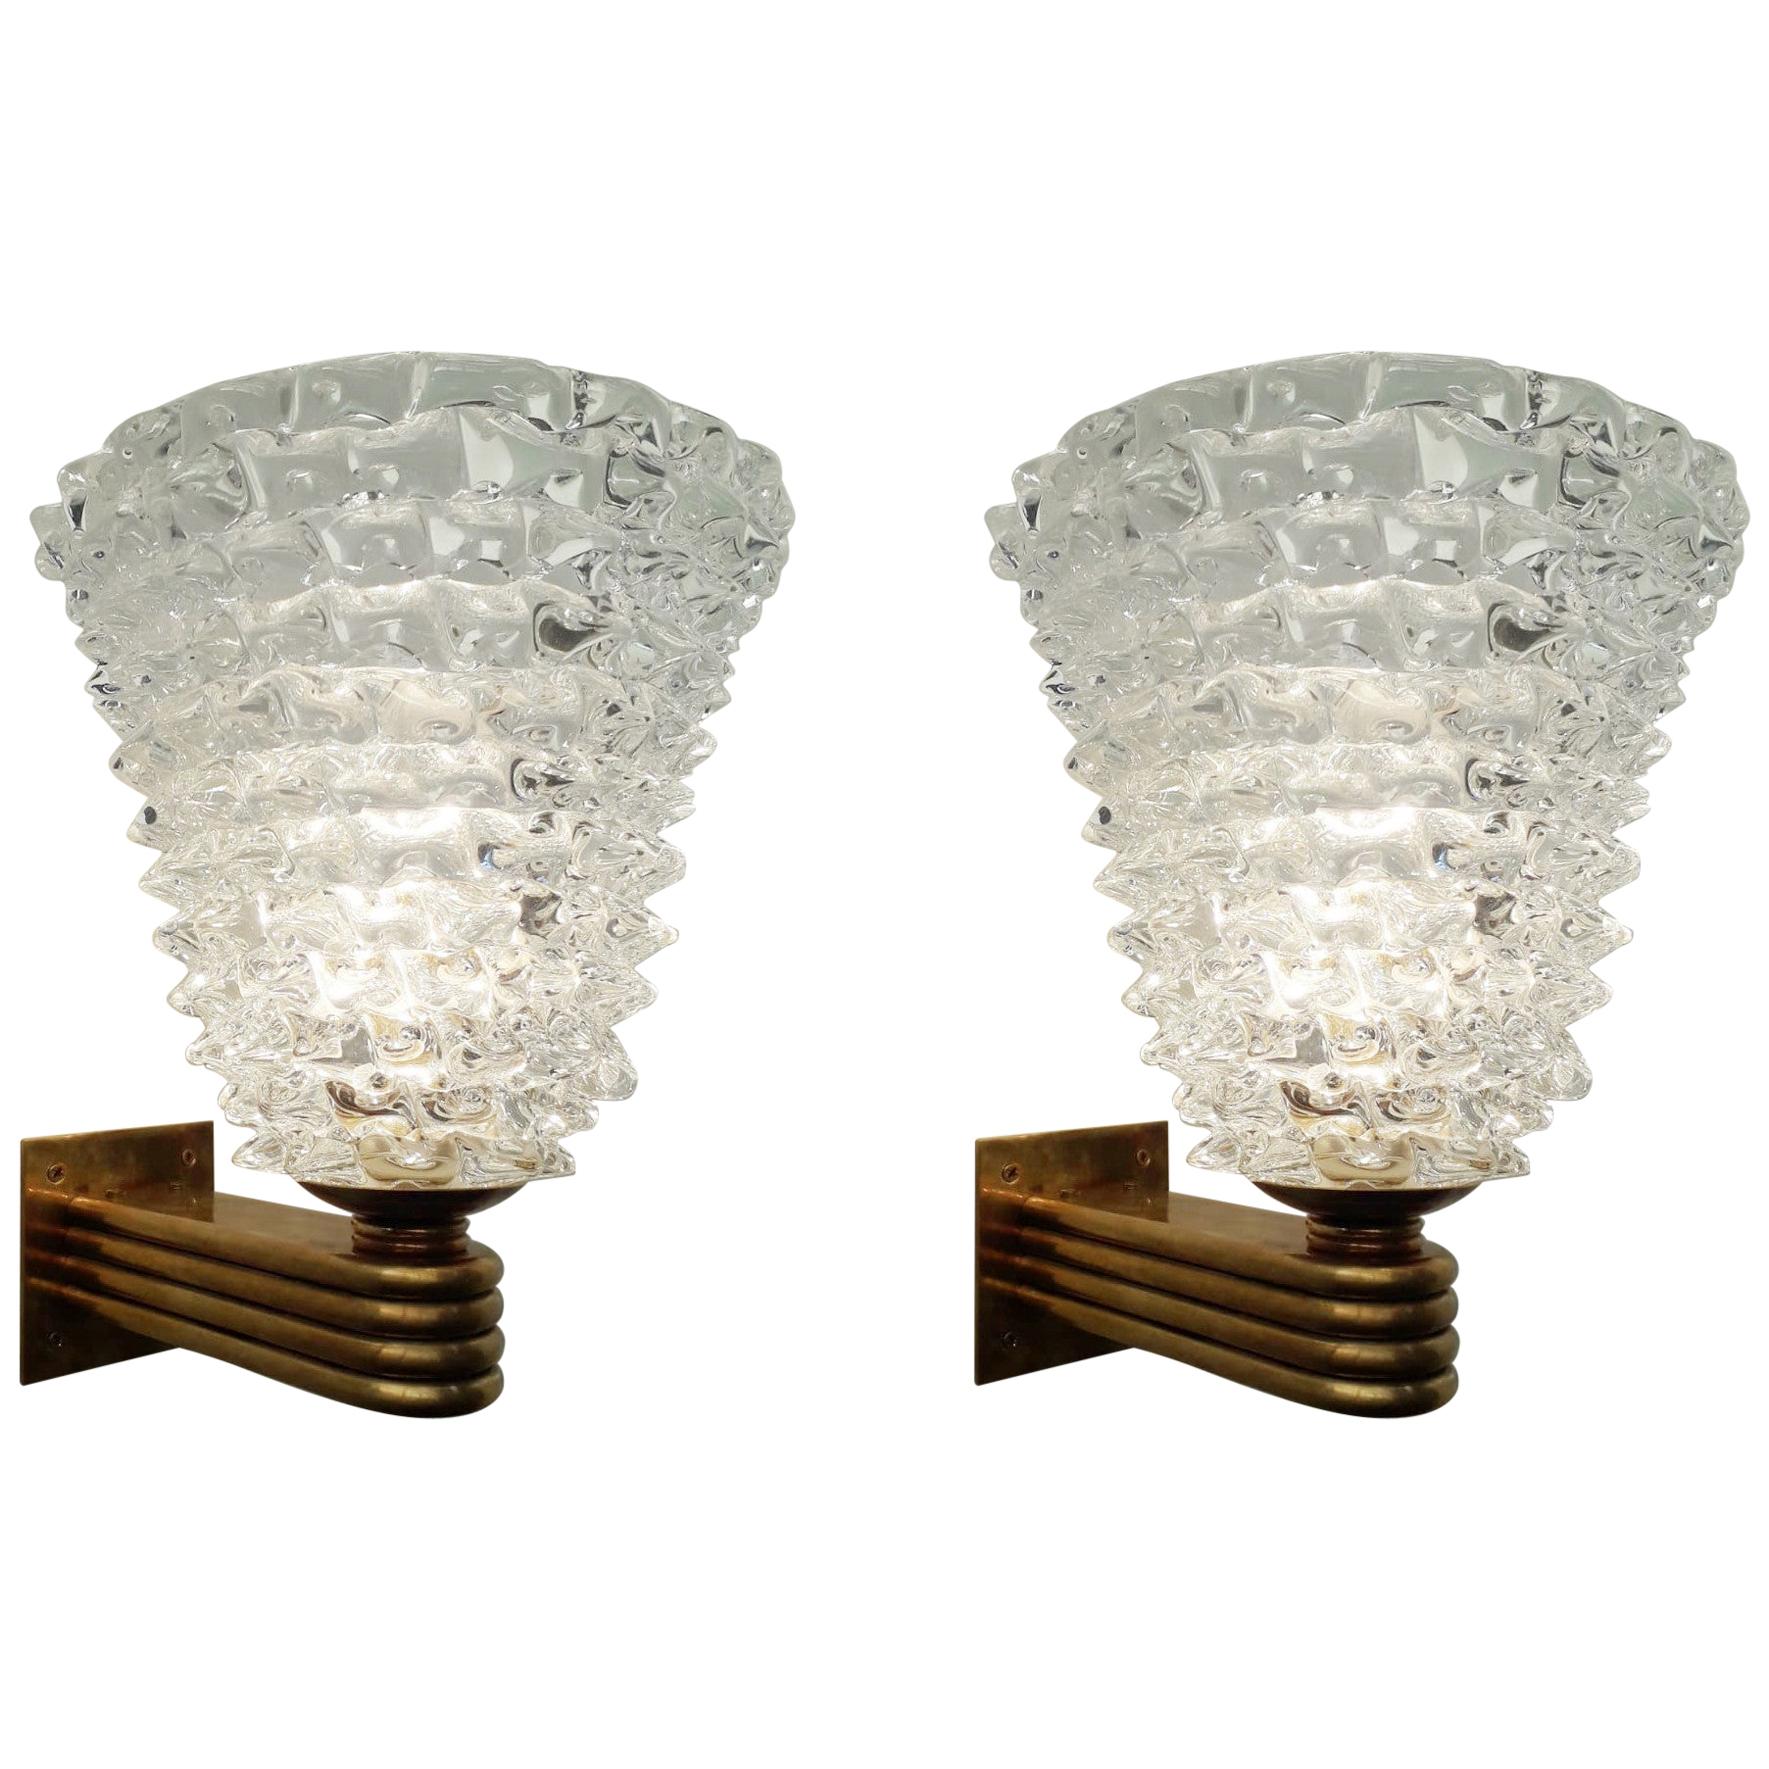 Pair of Rostrato Sconces by Barovier e Toso